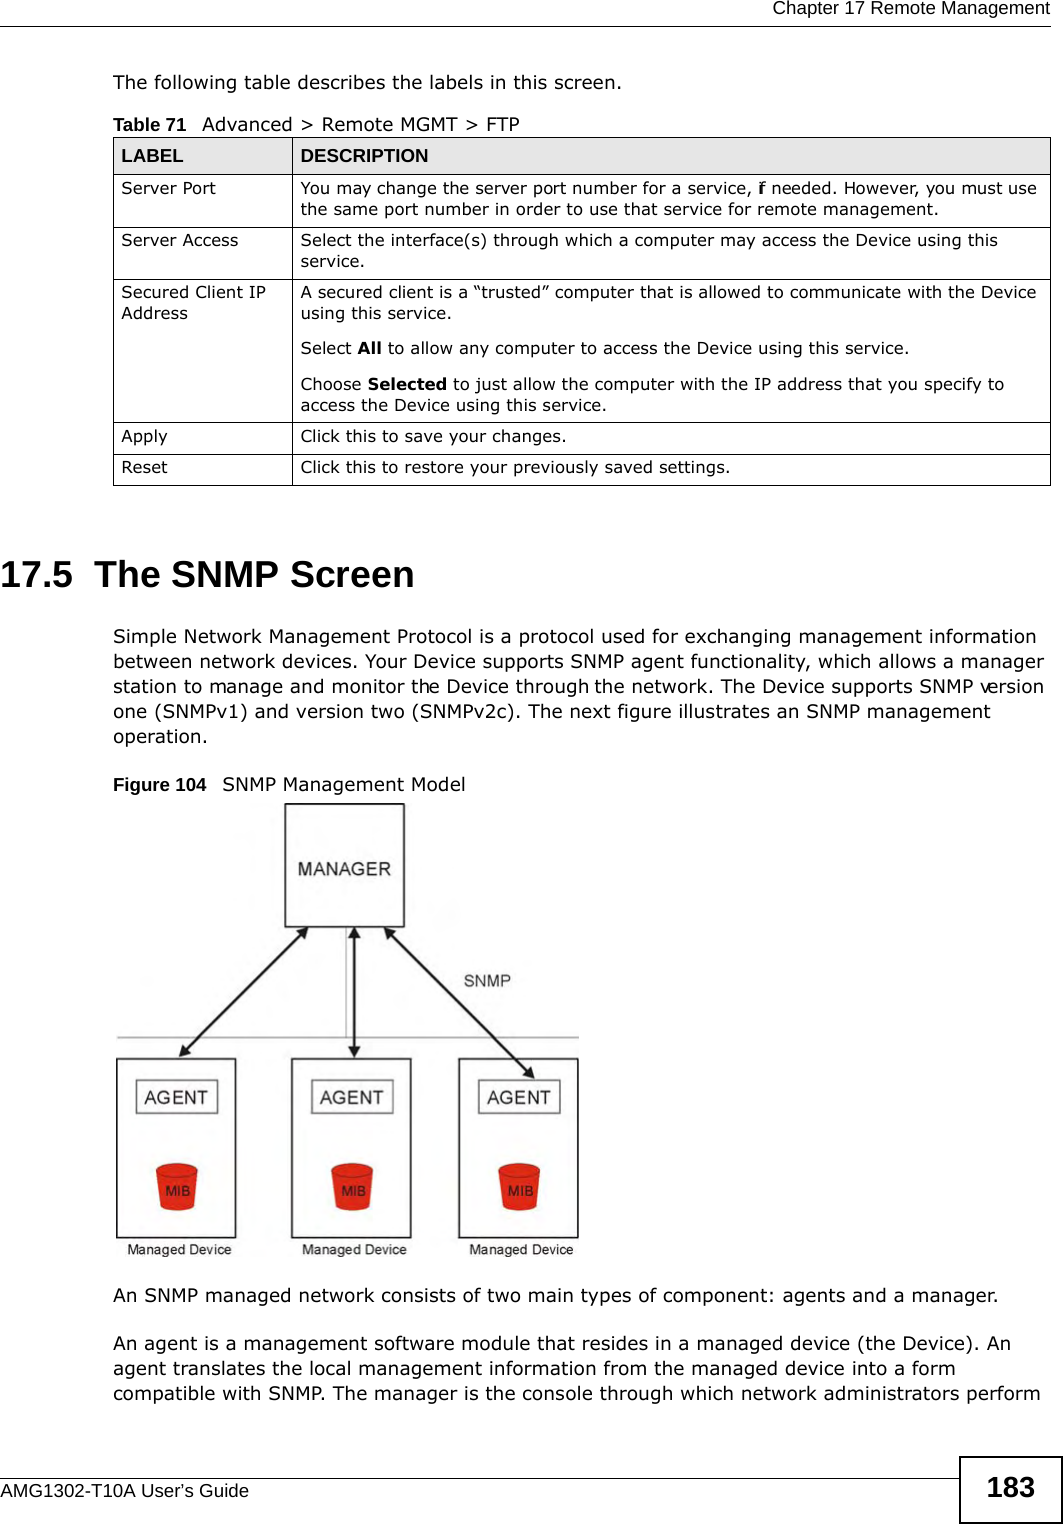  Chapter 17 Remote ManagementAMG1302-T10A User’s Guide 183The following table describes the labels in this screen. 17.5  The SNMP ScreenSimple Network Management Protocol is a protocol used for exchanging management information between network devices. Your Device supports SNMP agent functionality, which allows a manager station to manage and monitor the Device through the network. The Device supports SNMP version one (SNMPv1) and version two (SNMPv2c). The next figure illustrates an SNMP management operation.Figure 104   SNMP Management ModelAn SNMP managed network consists of two main types of component: agents and a manager. An agent is a management software module that resides in a managed device (the Device). An agent translates the local management information from the managed device into a form compatible with SNMP. The manager is the console through which network administrators perform Table 71   Advanced &gt; Remote MGMT &gt; FTPLABEL DESCRIPTIONServer Port You may change the server port number for a service, if needed. However, you must use the same port number in order to use that service for remote management.Server Access Select the interface(s) through which a computer may access the Device using this service.Secured Client IP AddressA secured client is a “trusted” computer that is allowed to communicate with the Device using this service. Select All to allow any computer to access the Device using this service.Choose Selected to just allow the computer with the IP address that you specify to access the Device using this service.Apply Click this to save your changes.Reset Click this to restore your previously saved settings.